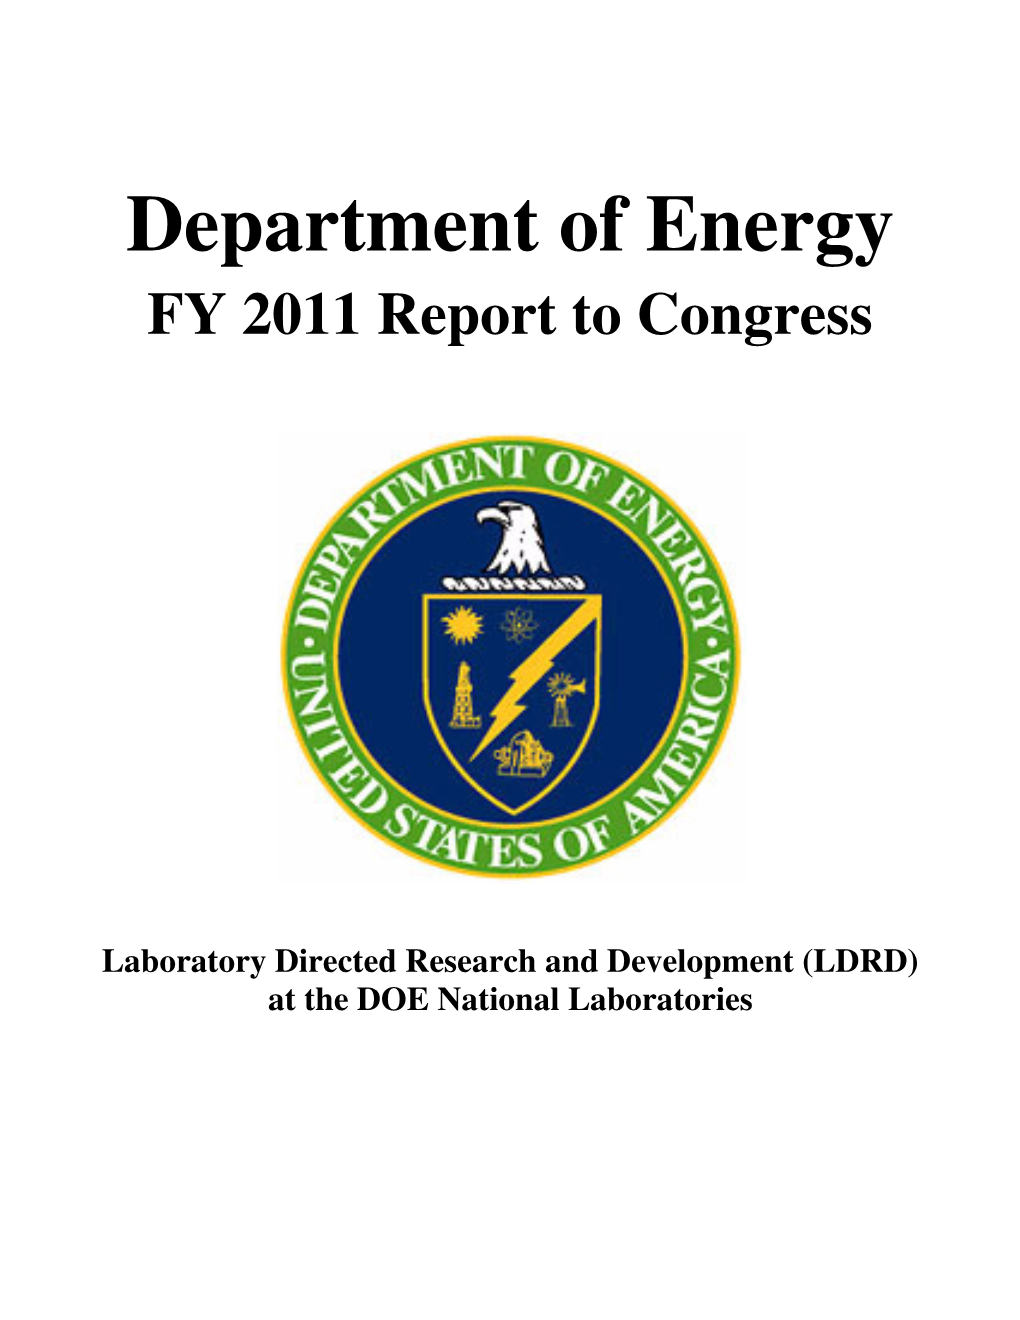 FY 2011 LDRD Report to Congress